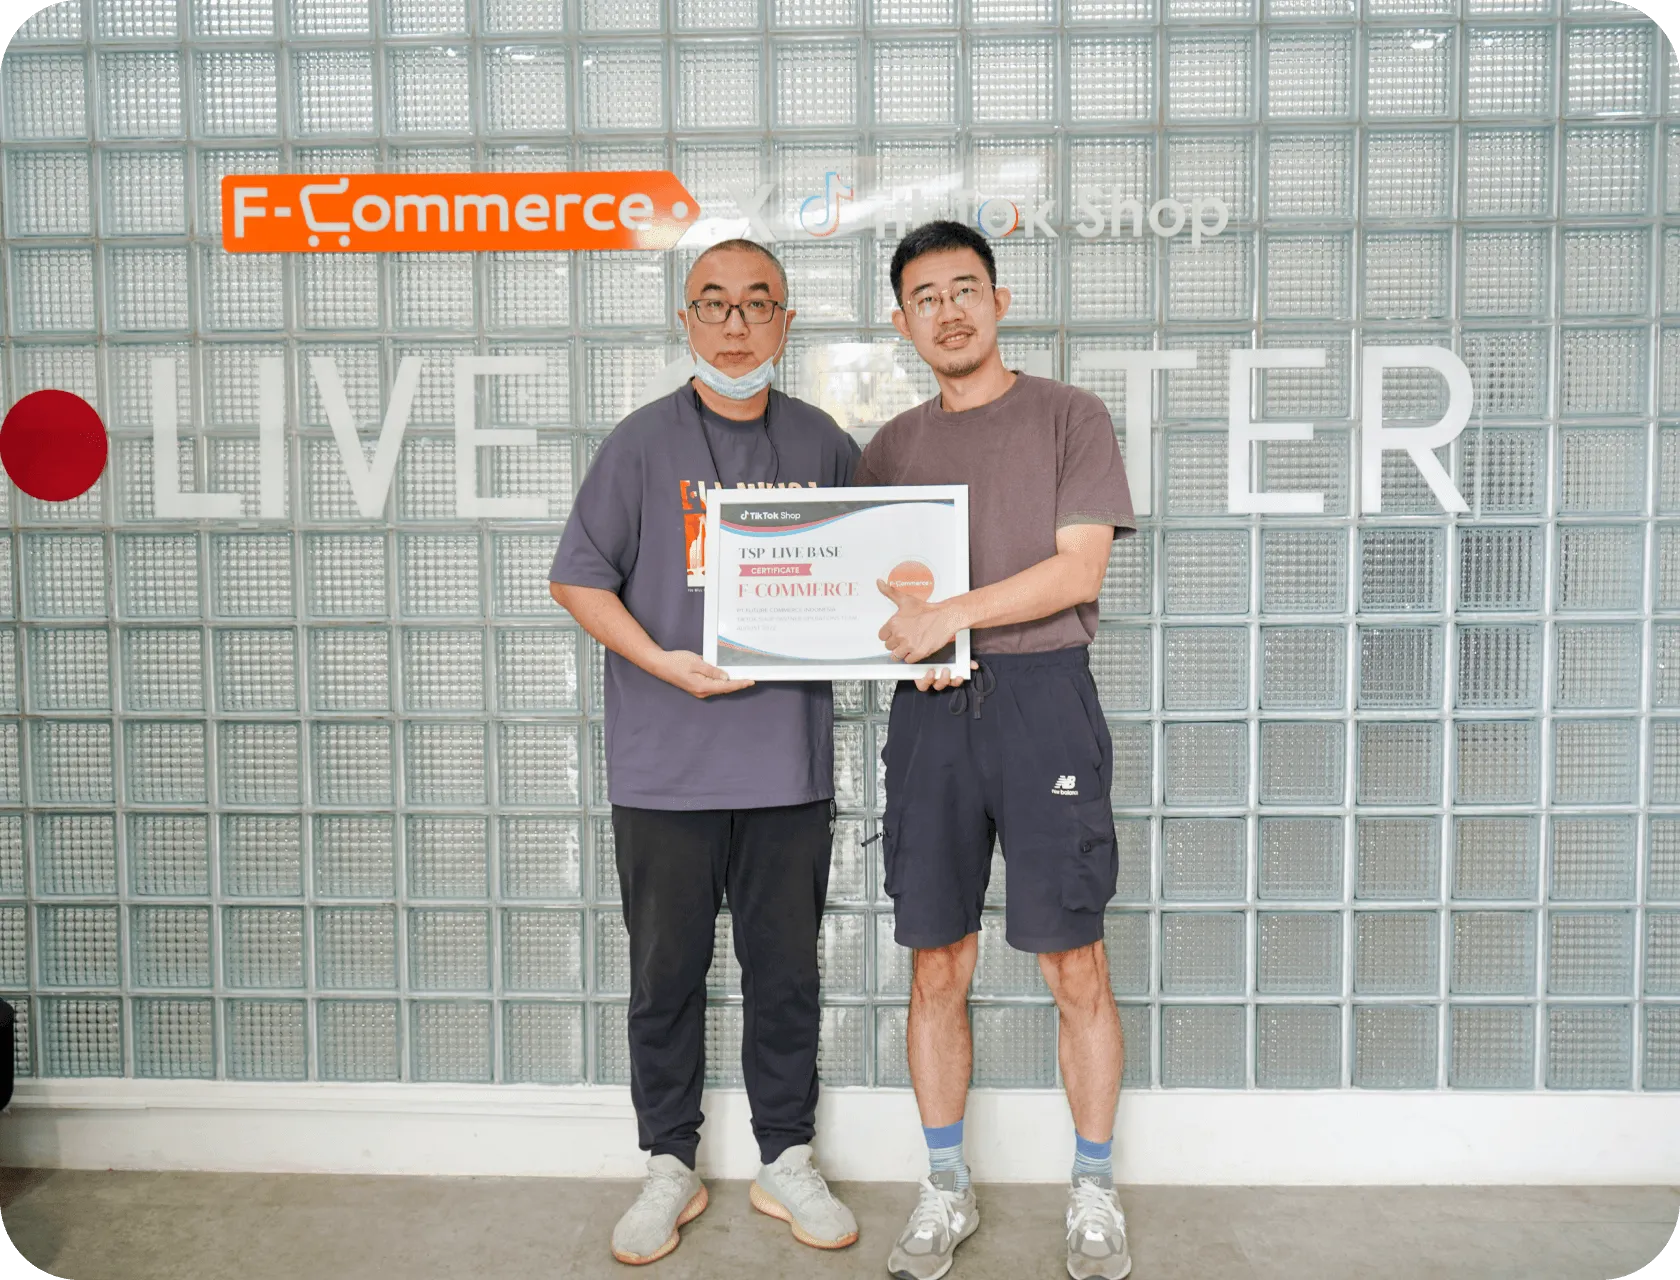 Head of F-commerce received an award certificate from tiktok representative